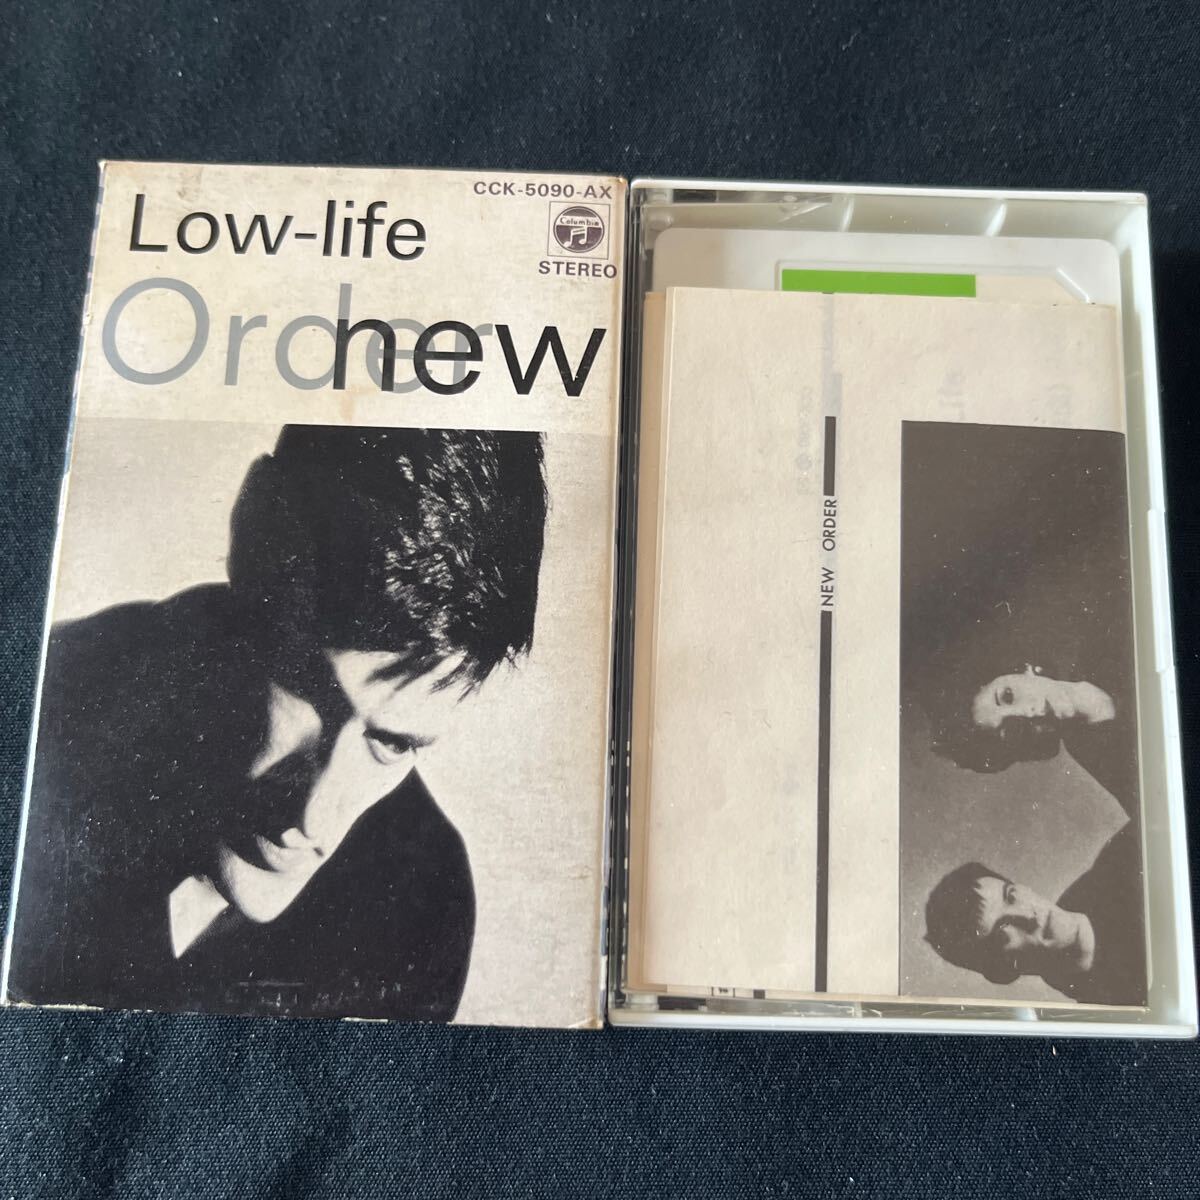 # cassette tape domestic version # new * order [ low * life ]